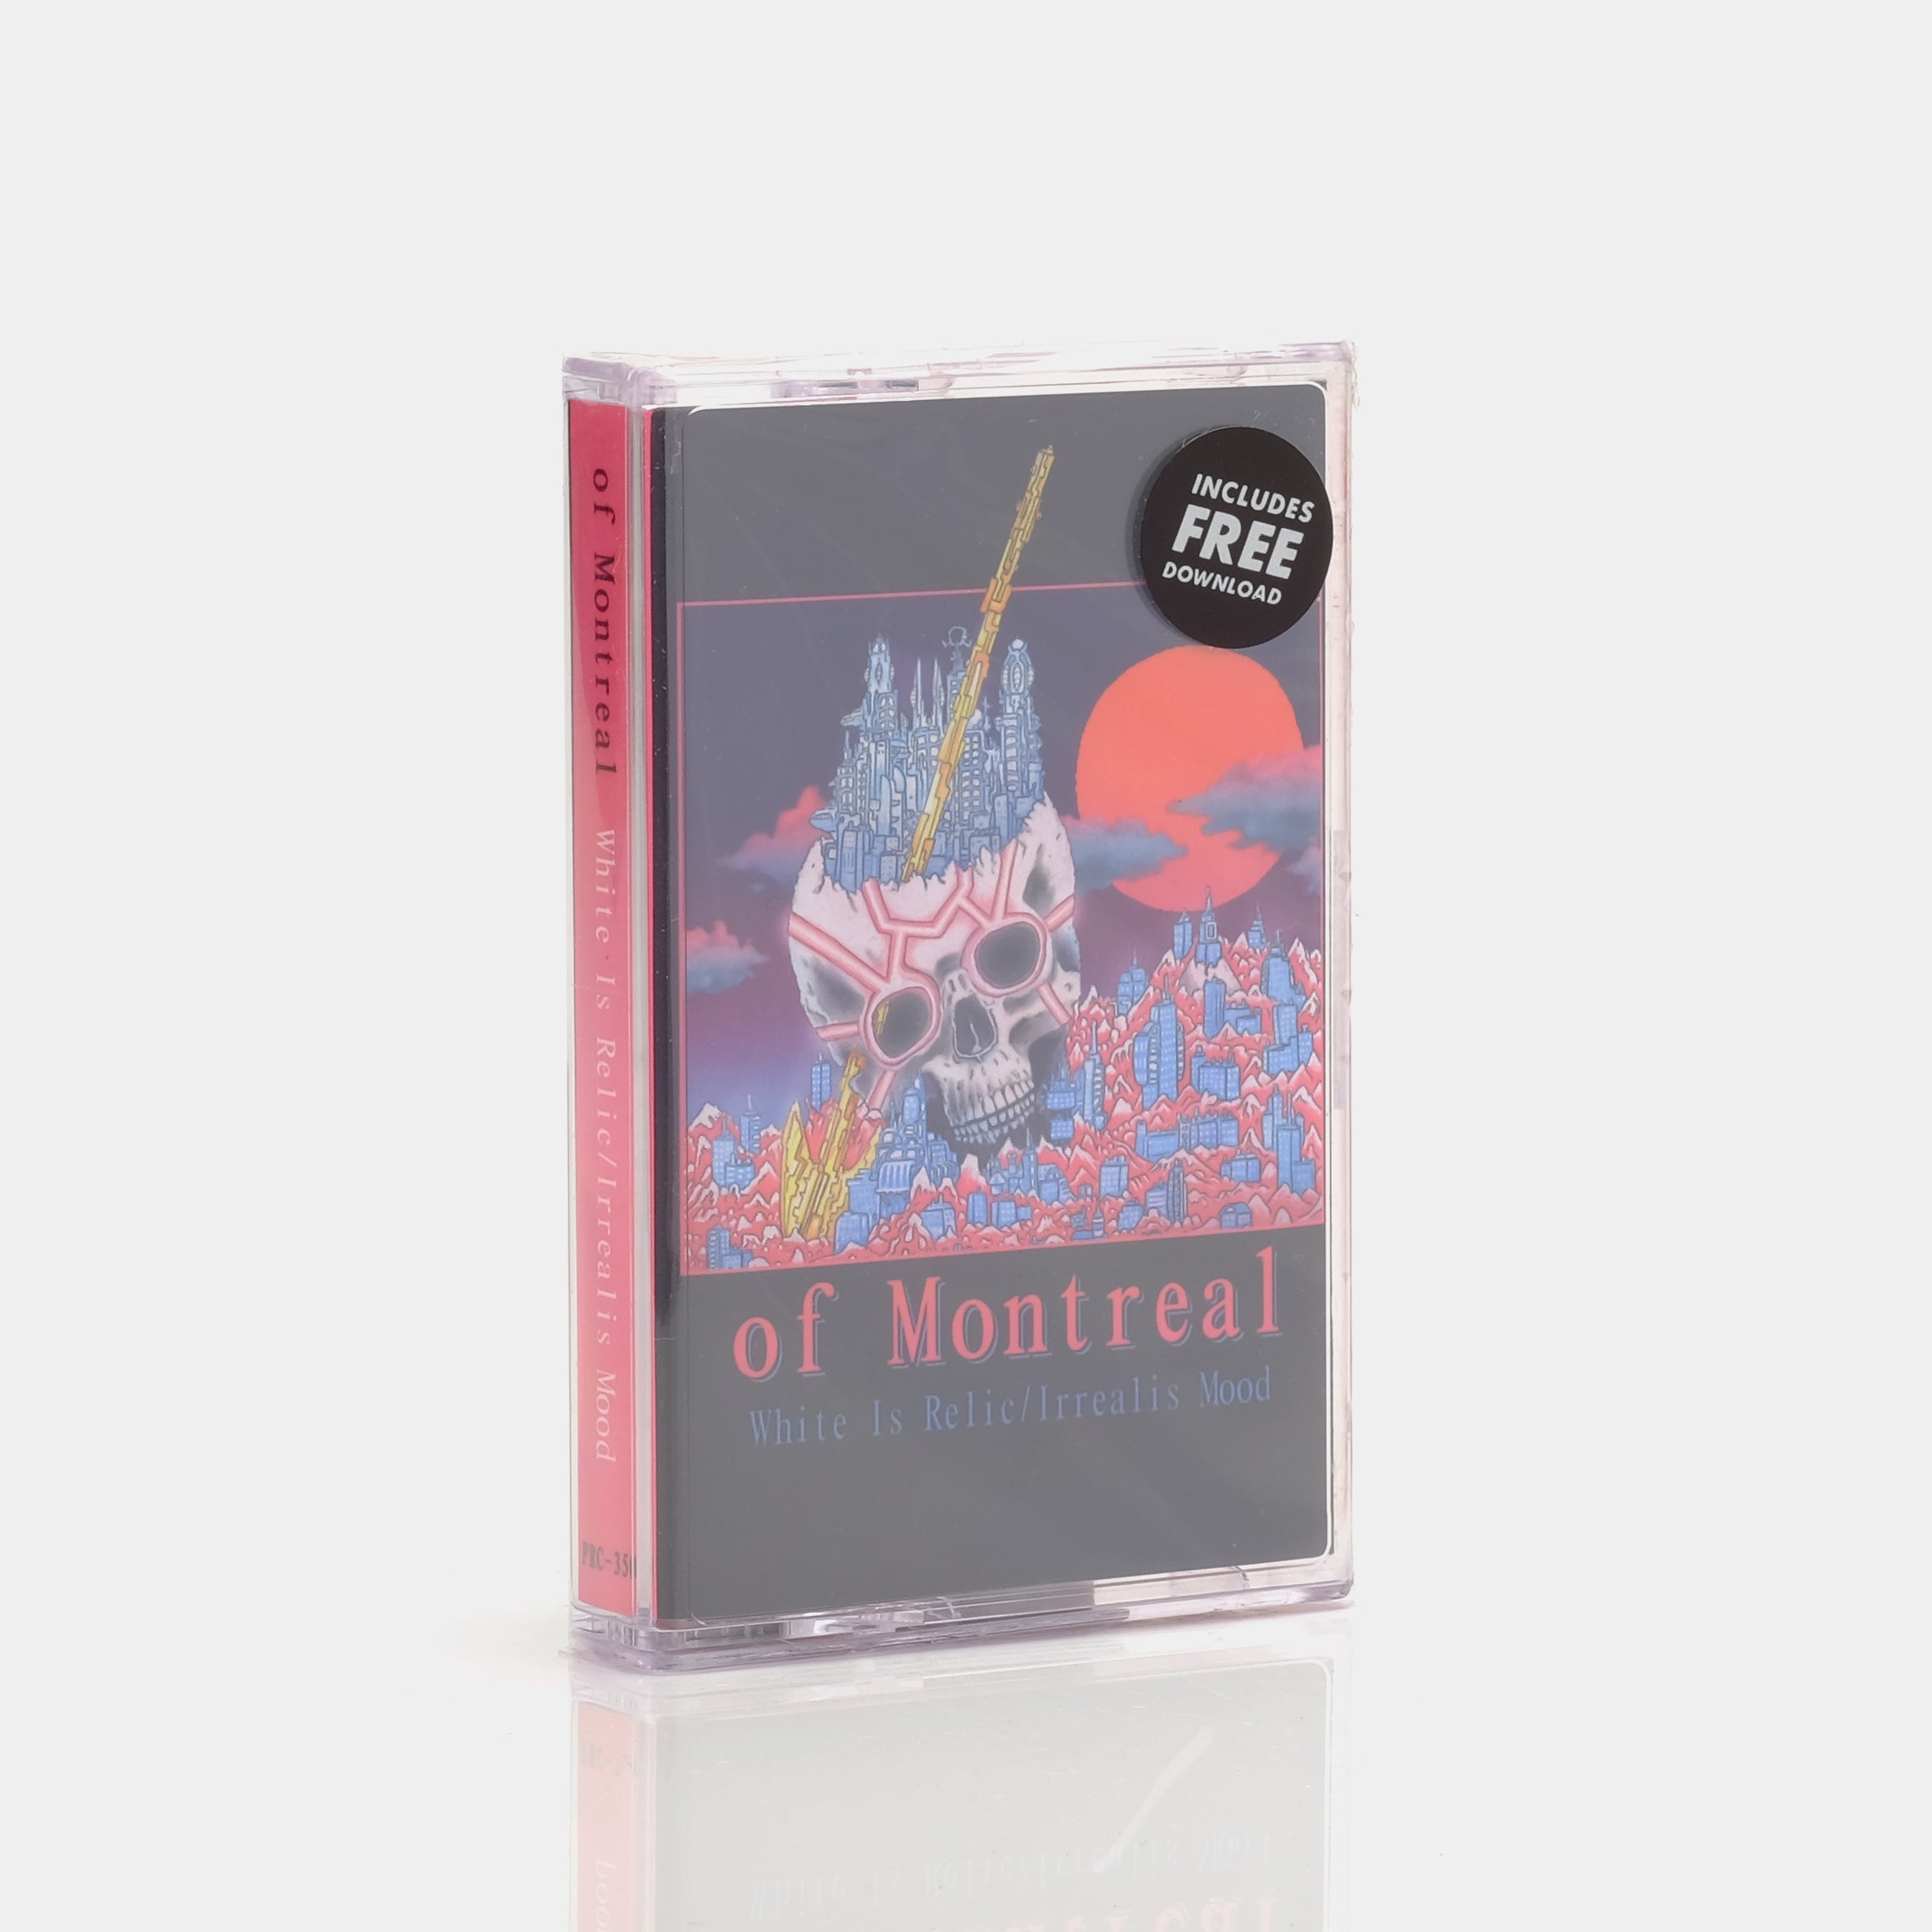 Of Montreal - White Is Relic/Irrealis Mood Cassette Tape